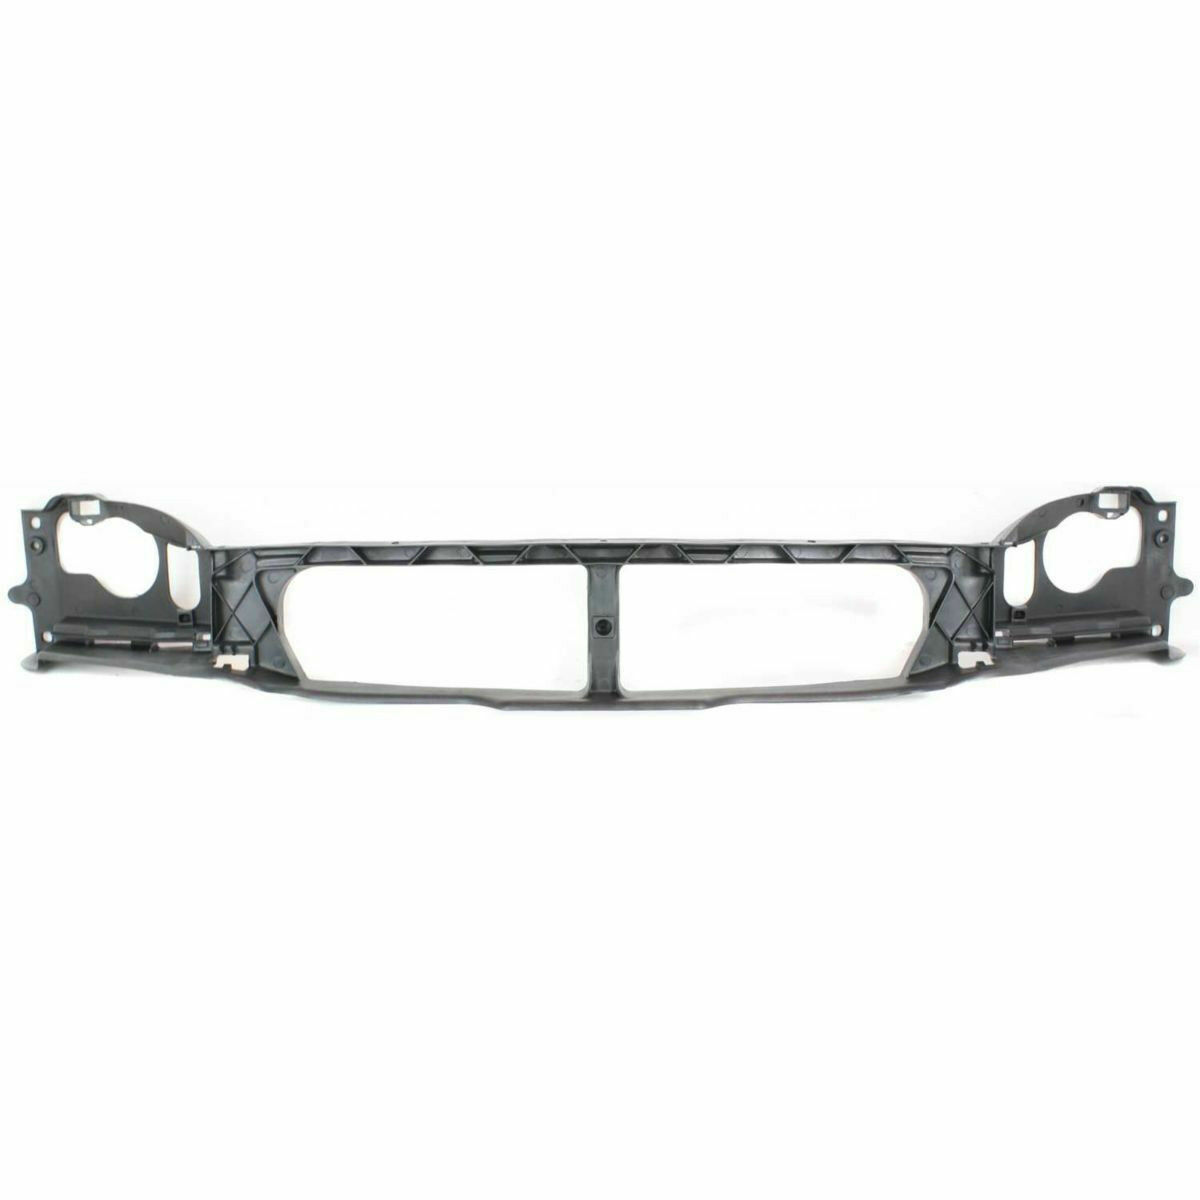 New Header Panel Fits 1999-2003 Ford Windstar FO1221121 XF2Z8A284AA